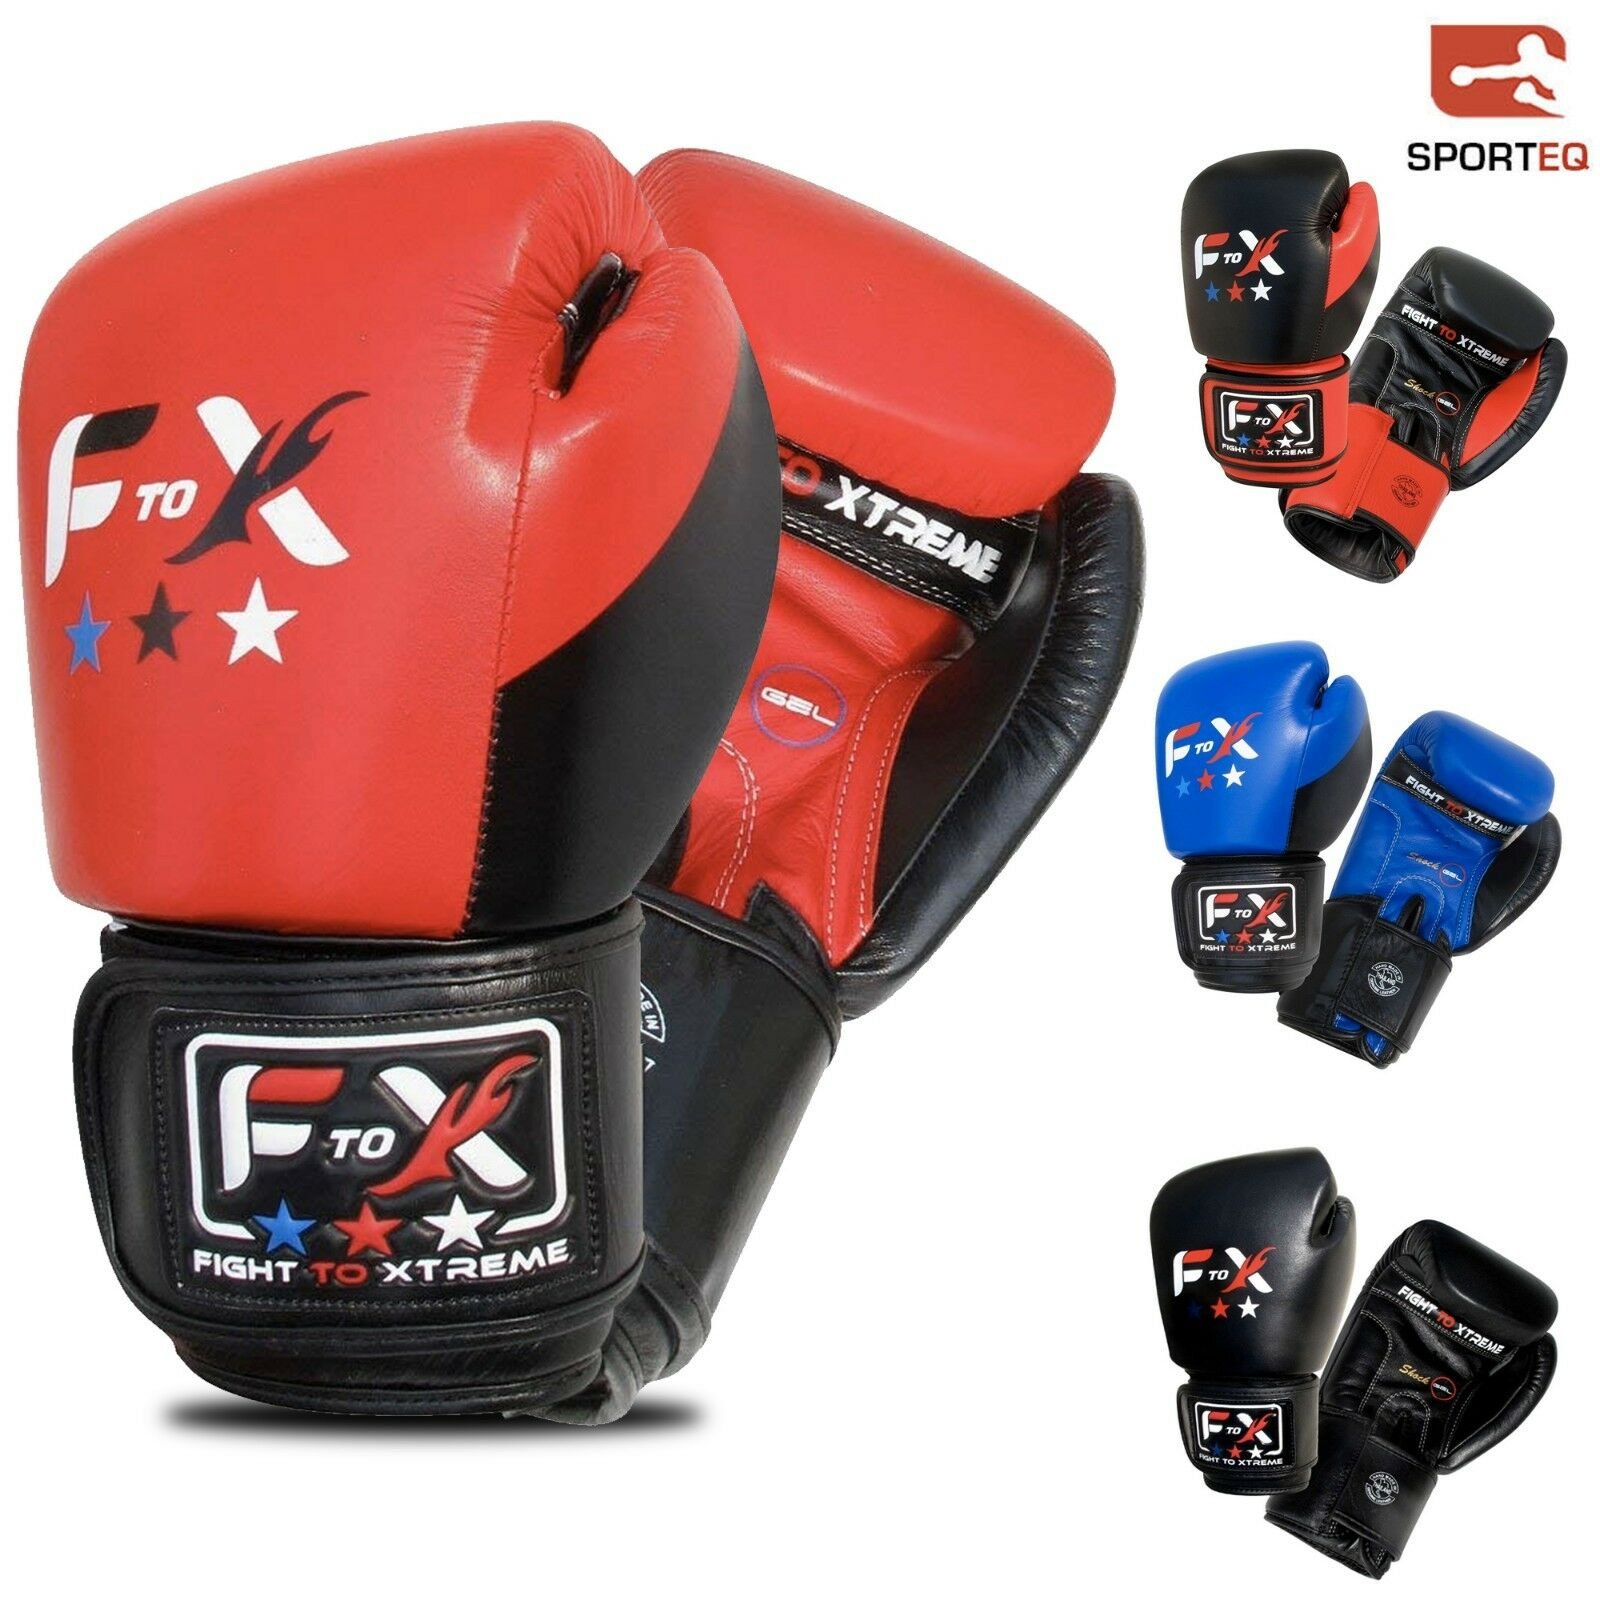 What Equipment Do I Need To Start Boxing?